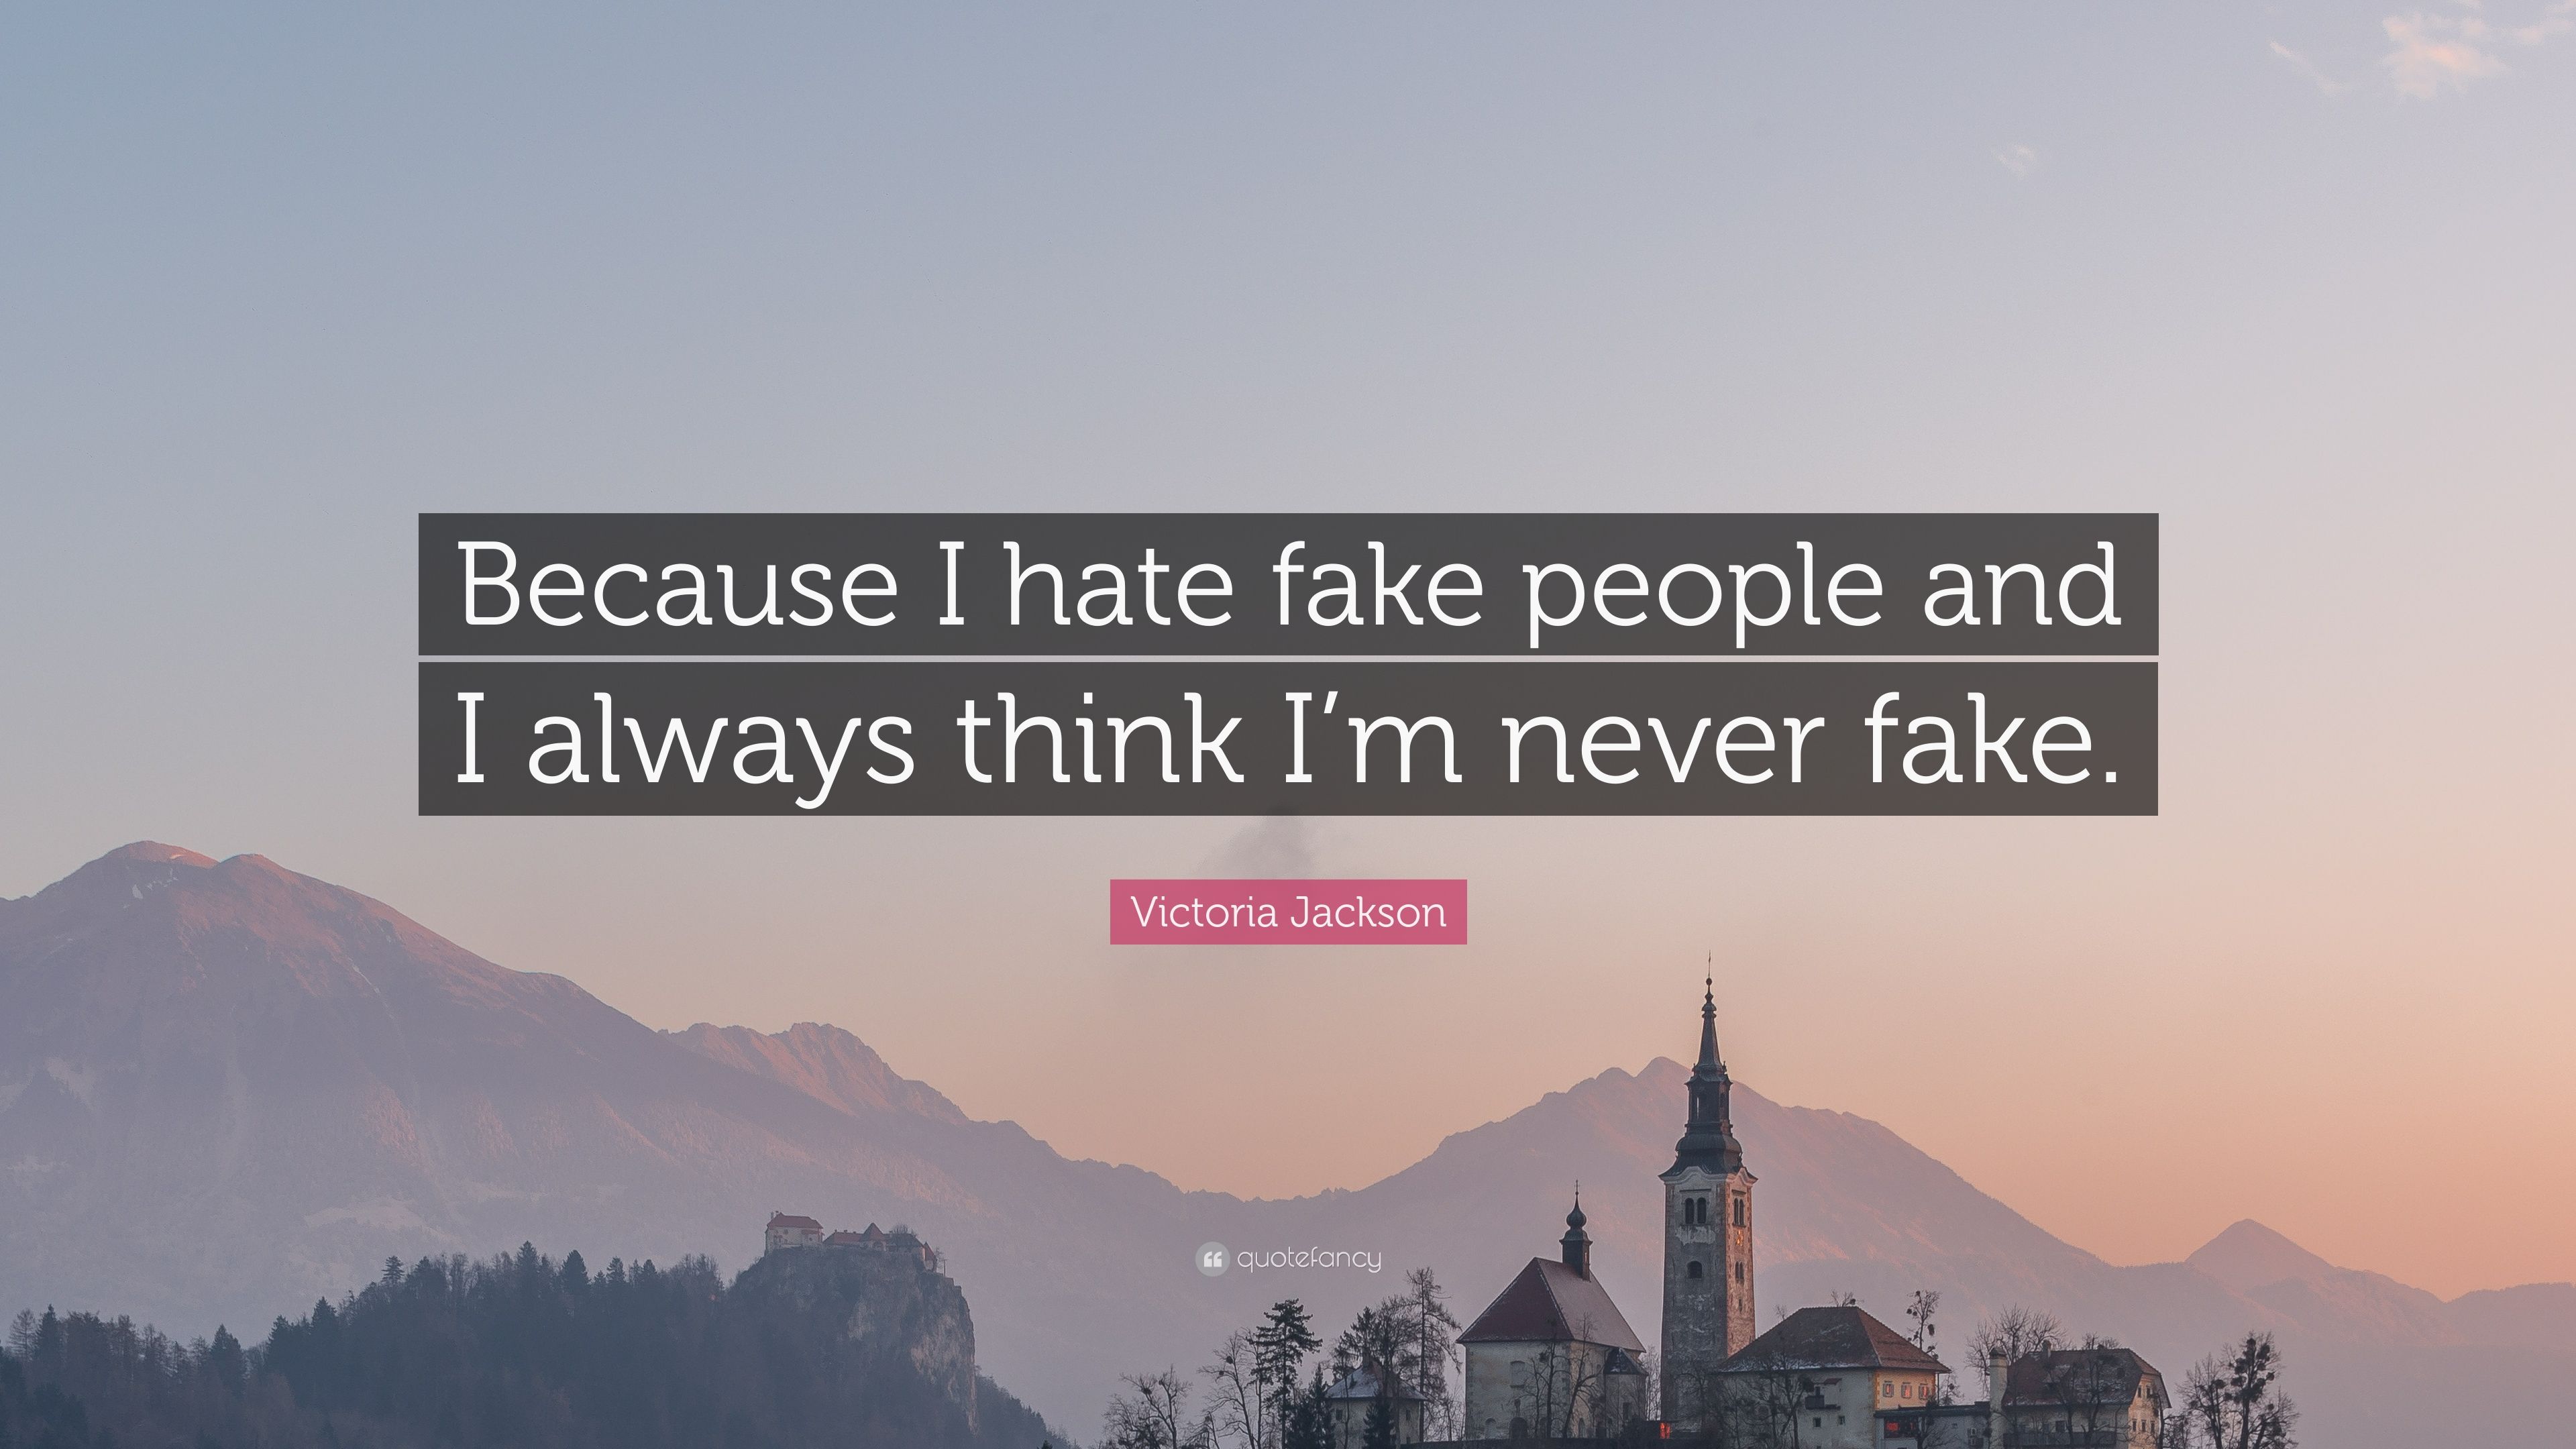 Victoria Jackson Quote: “Because I hate fake people and I always think I'm never fake.” (7 wallpaper)